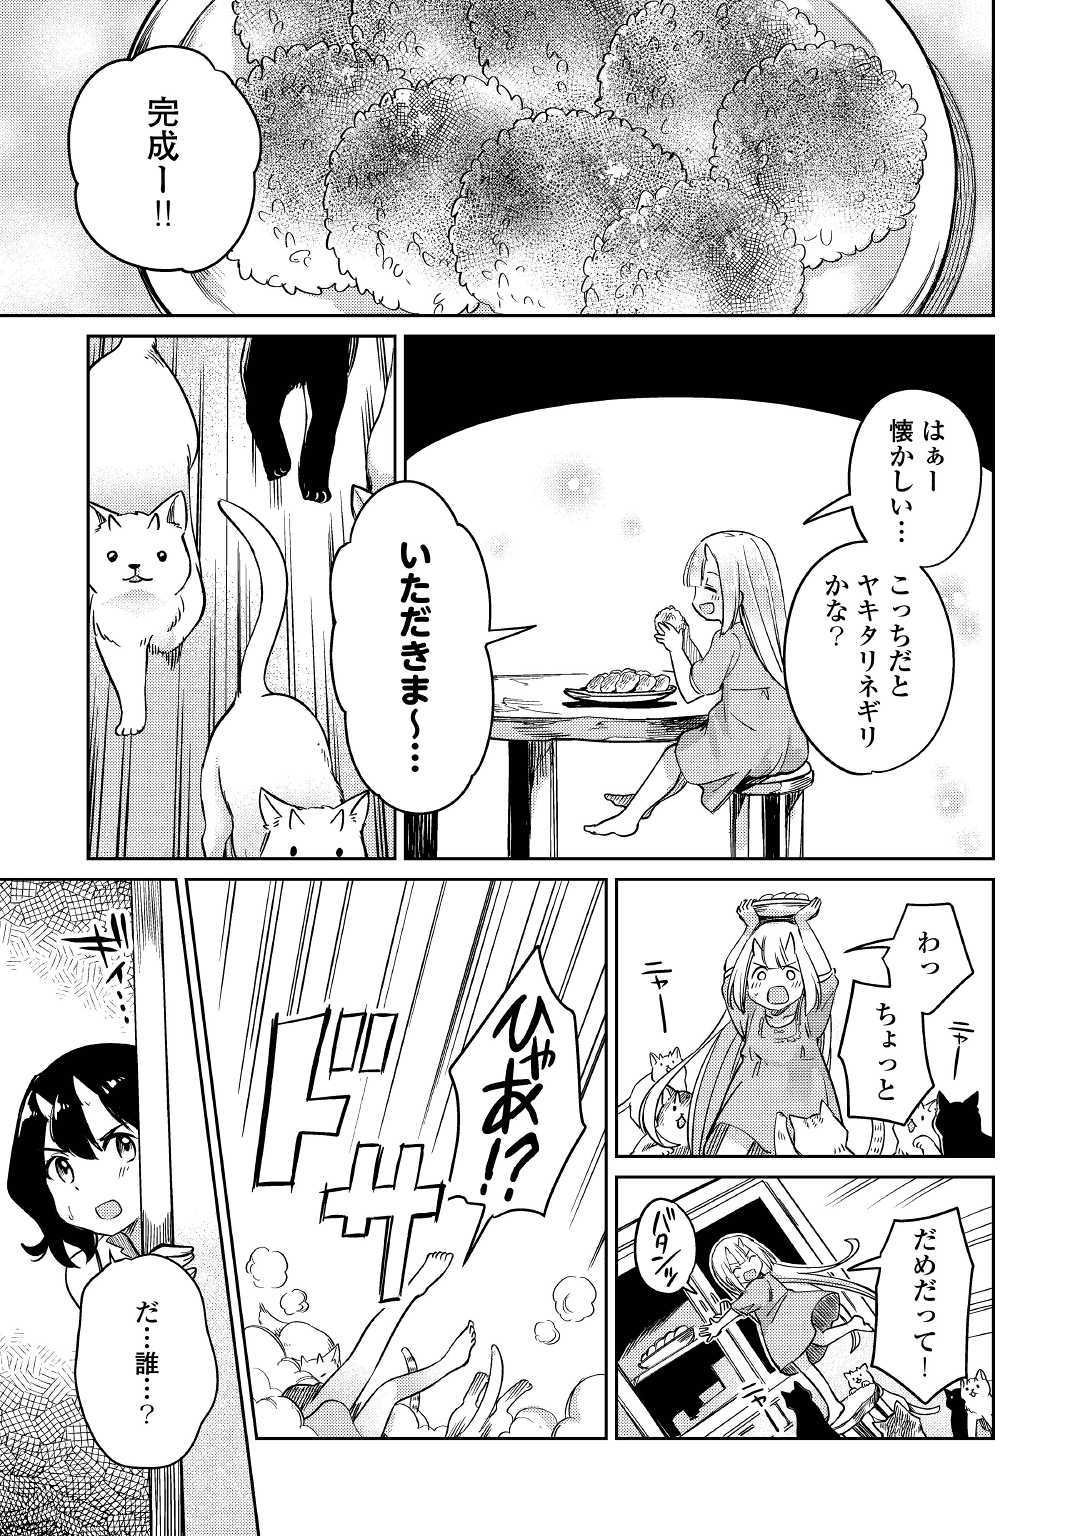 The Former Structural Researcher’s Story of Otherworldly Adventure 第24話 - Page 15